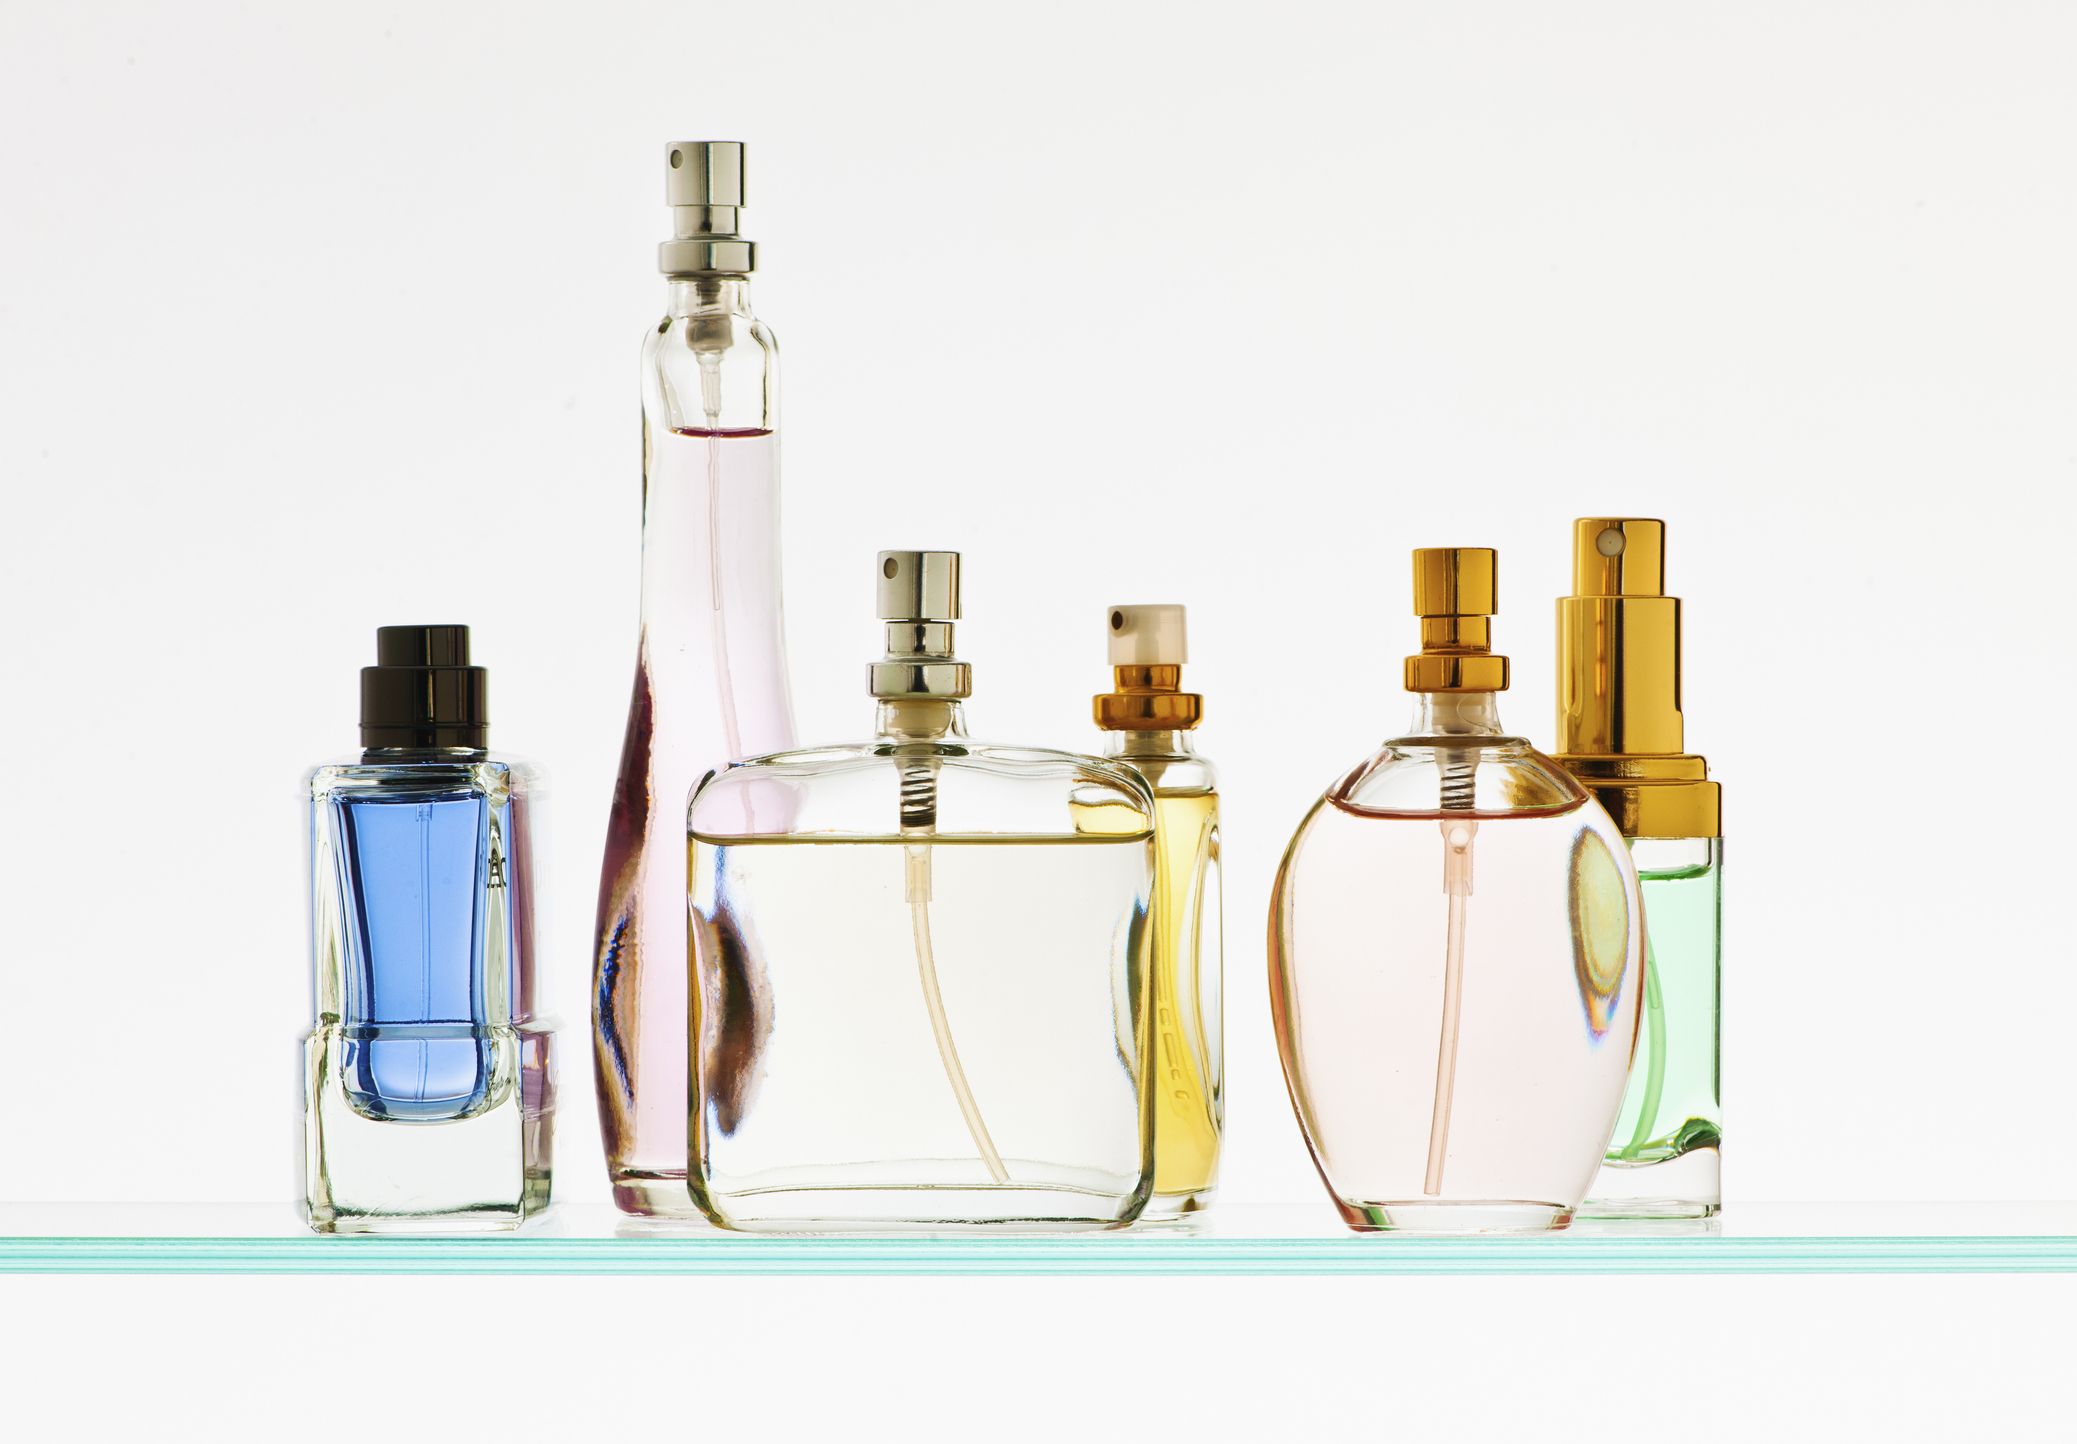 Best perfume for women, chosen by GH beauty experts and editors